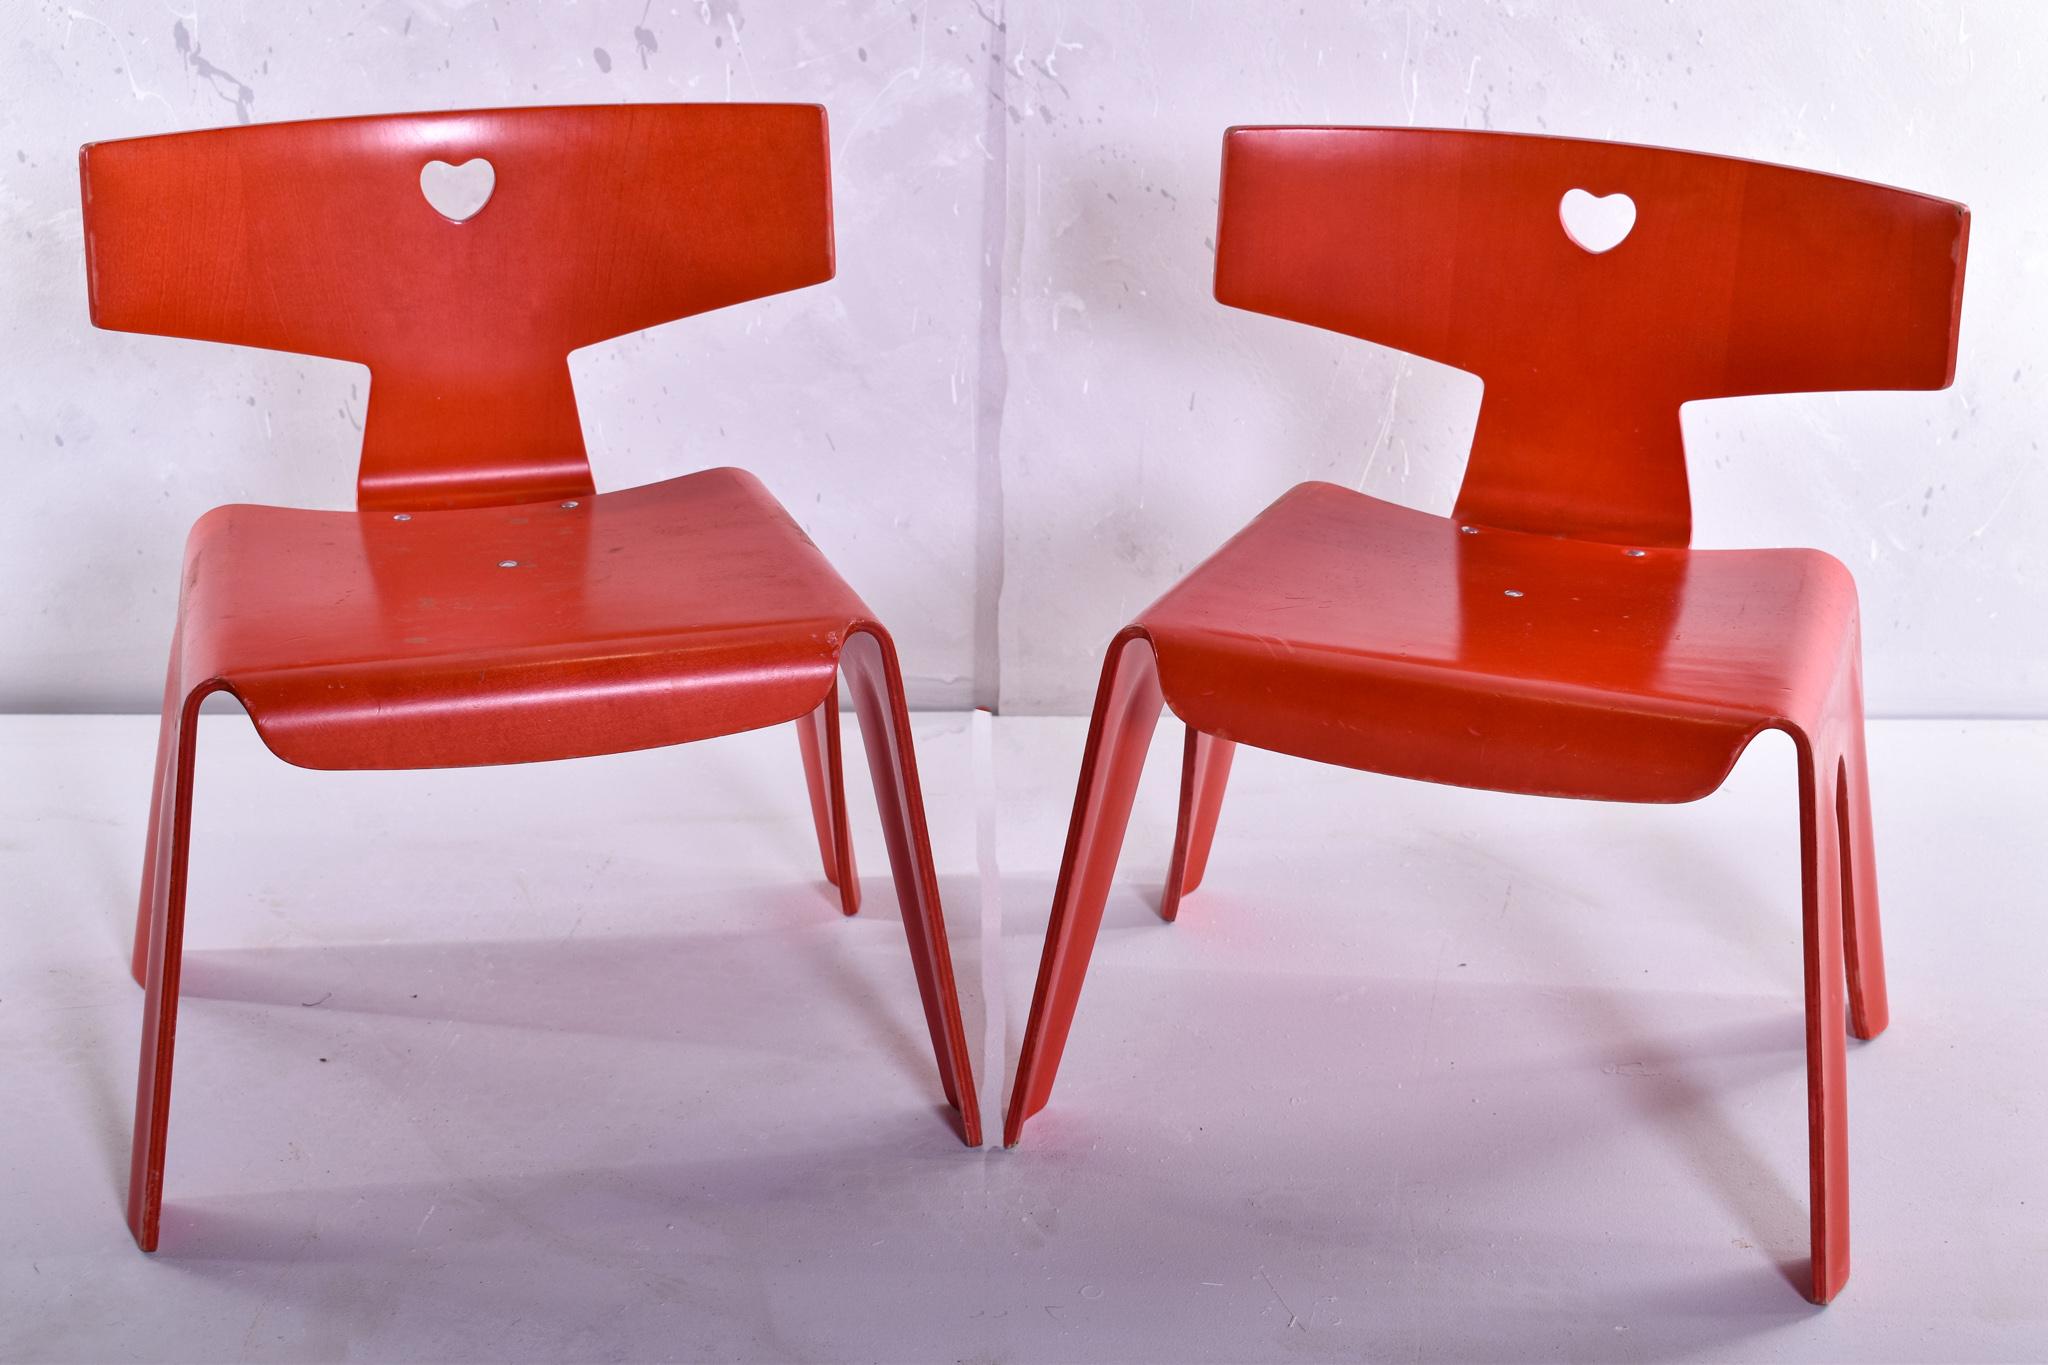 Fantastic and rare pair of Charles and Ray Eames children's chairs, originally designed in 1945. Elegantly moulded birch wood construction, finely pierced backrests with heart motifs, presenting in the most vibrant red dyed finish with applied